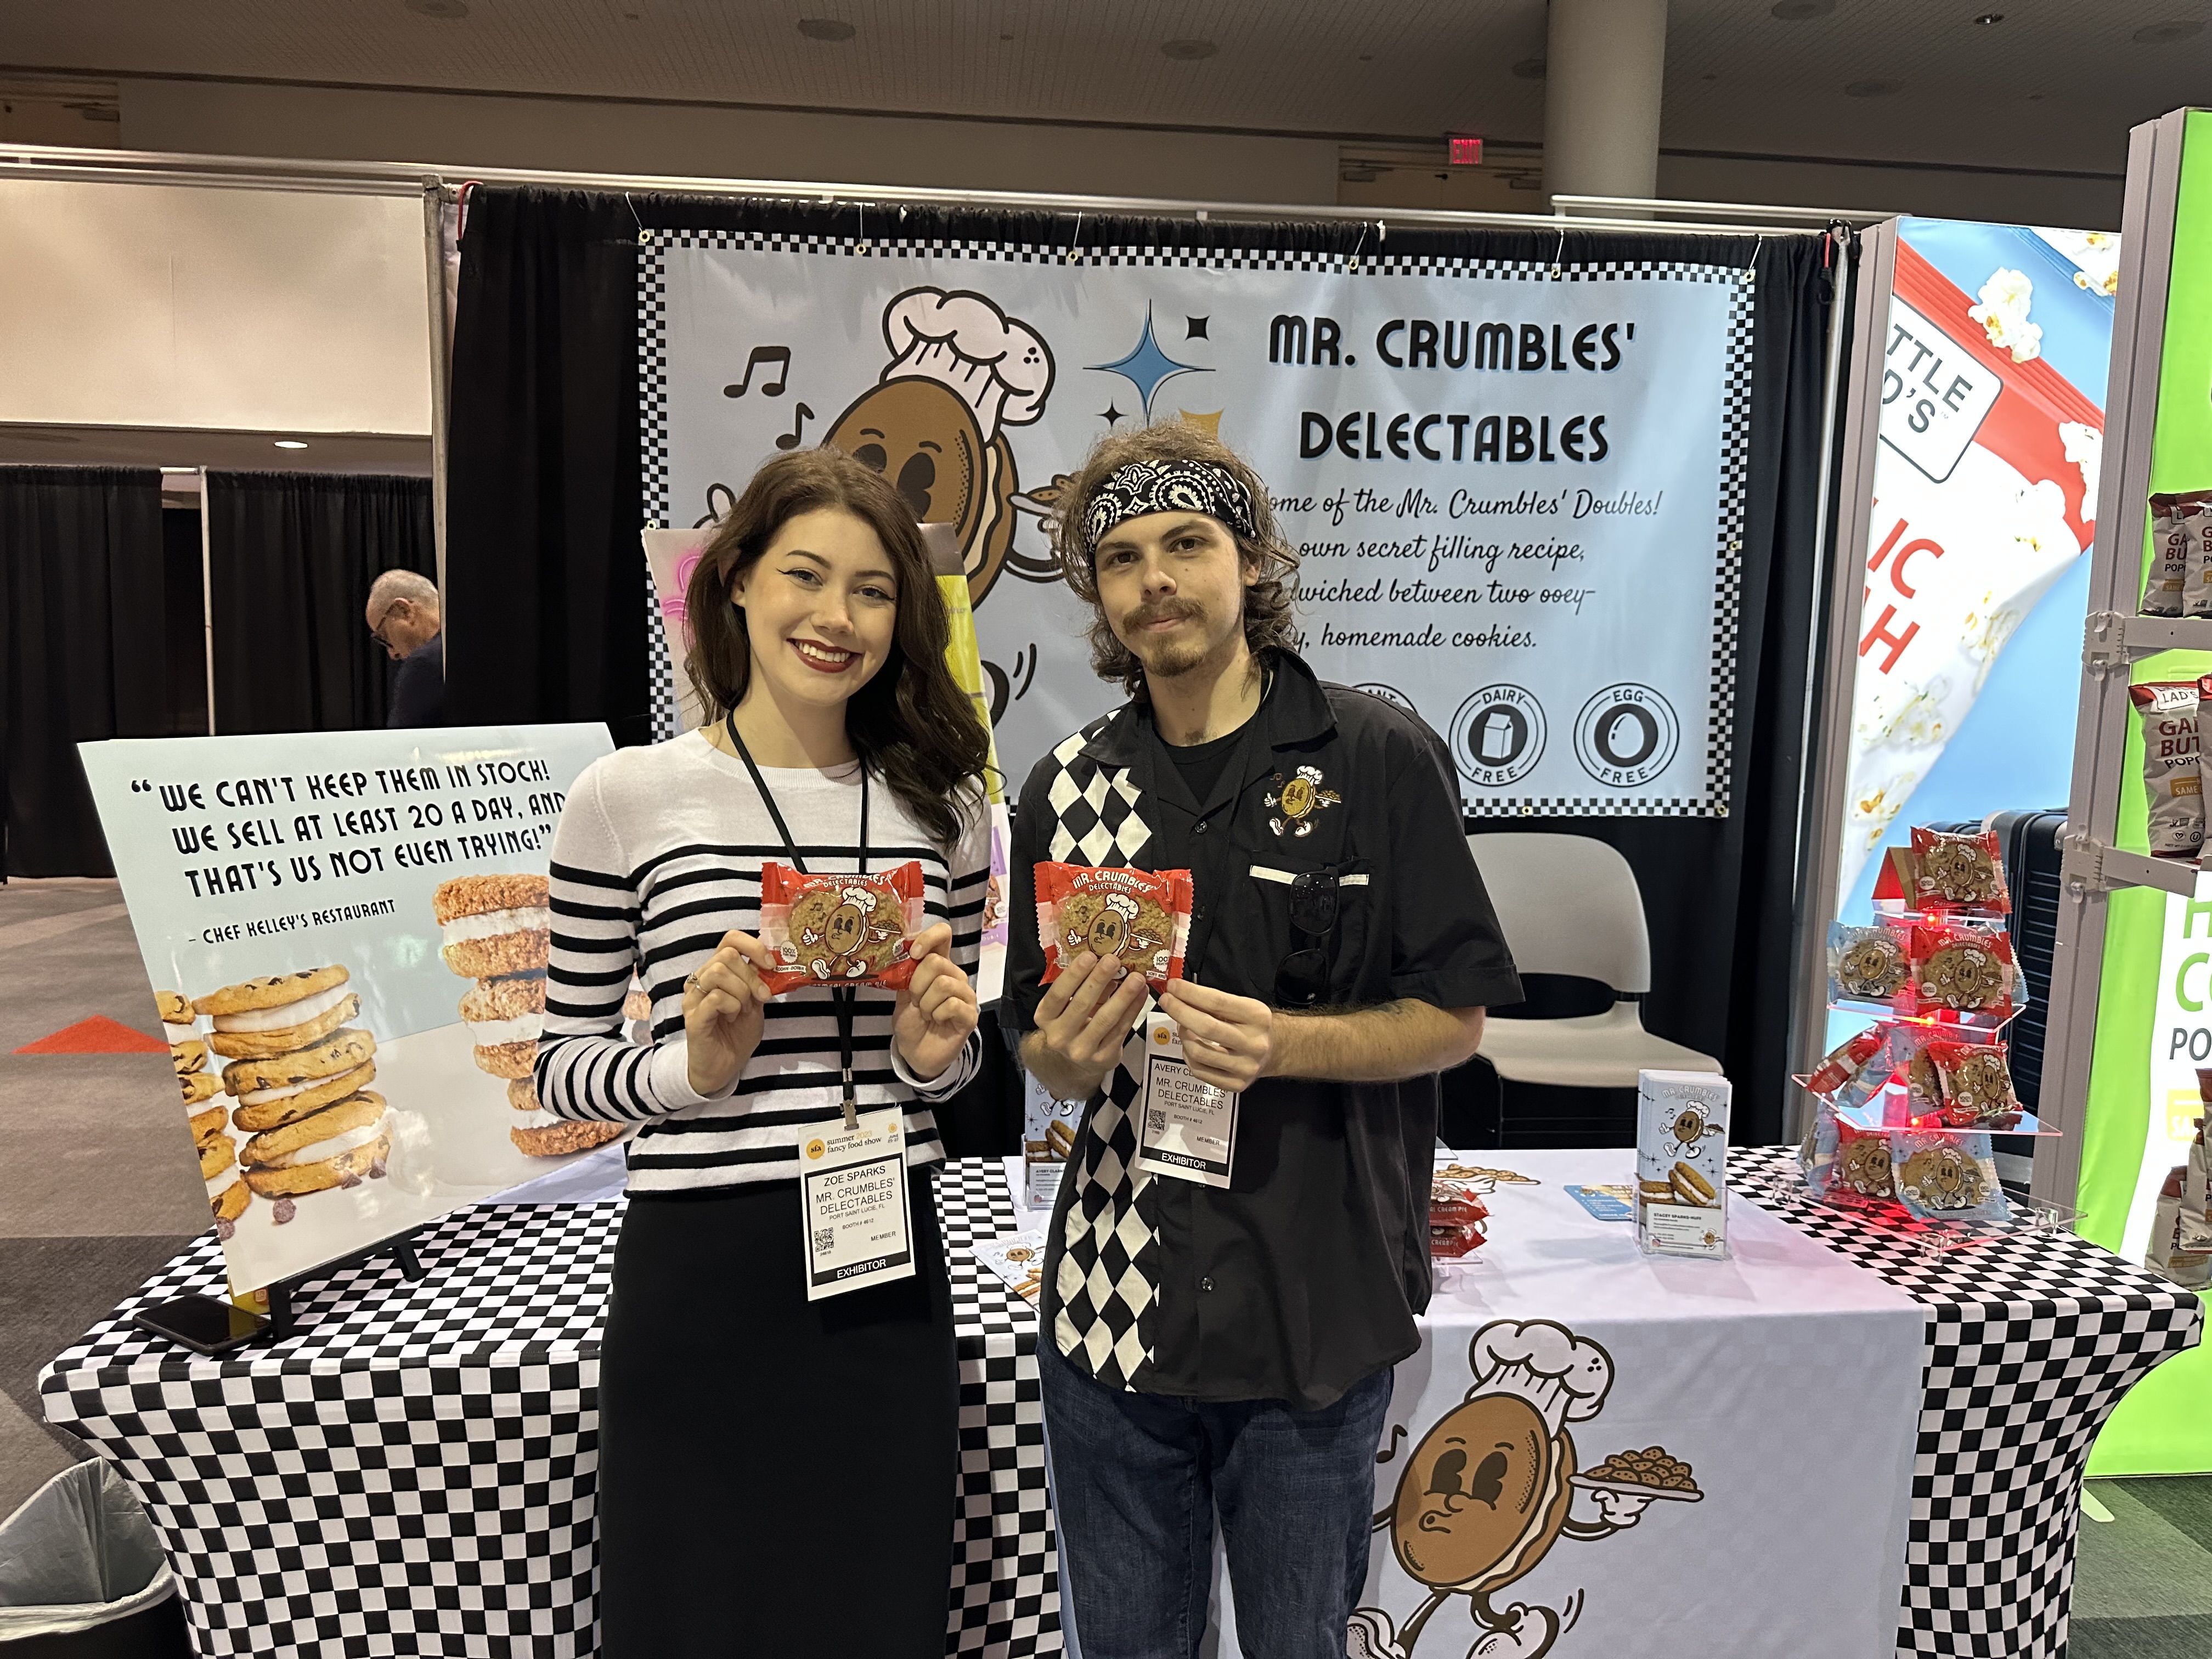 Two representatives of Mr. Crumbles' Delectables pose with their cookies in front of a trade show booth.